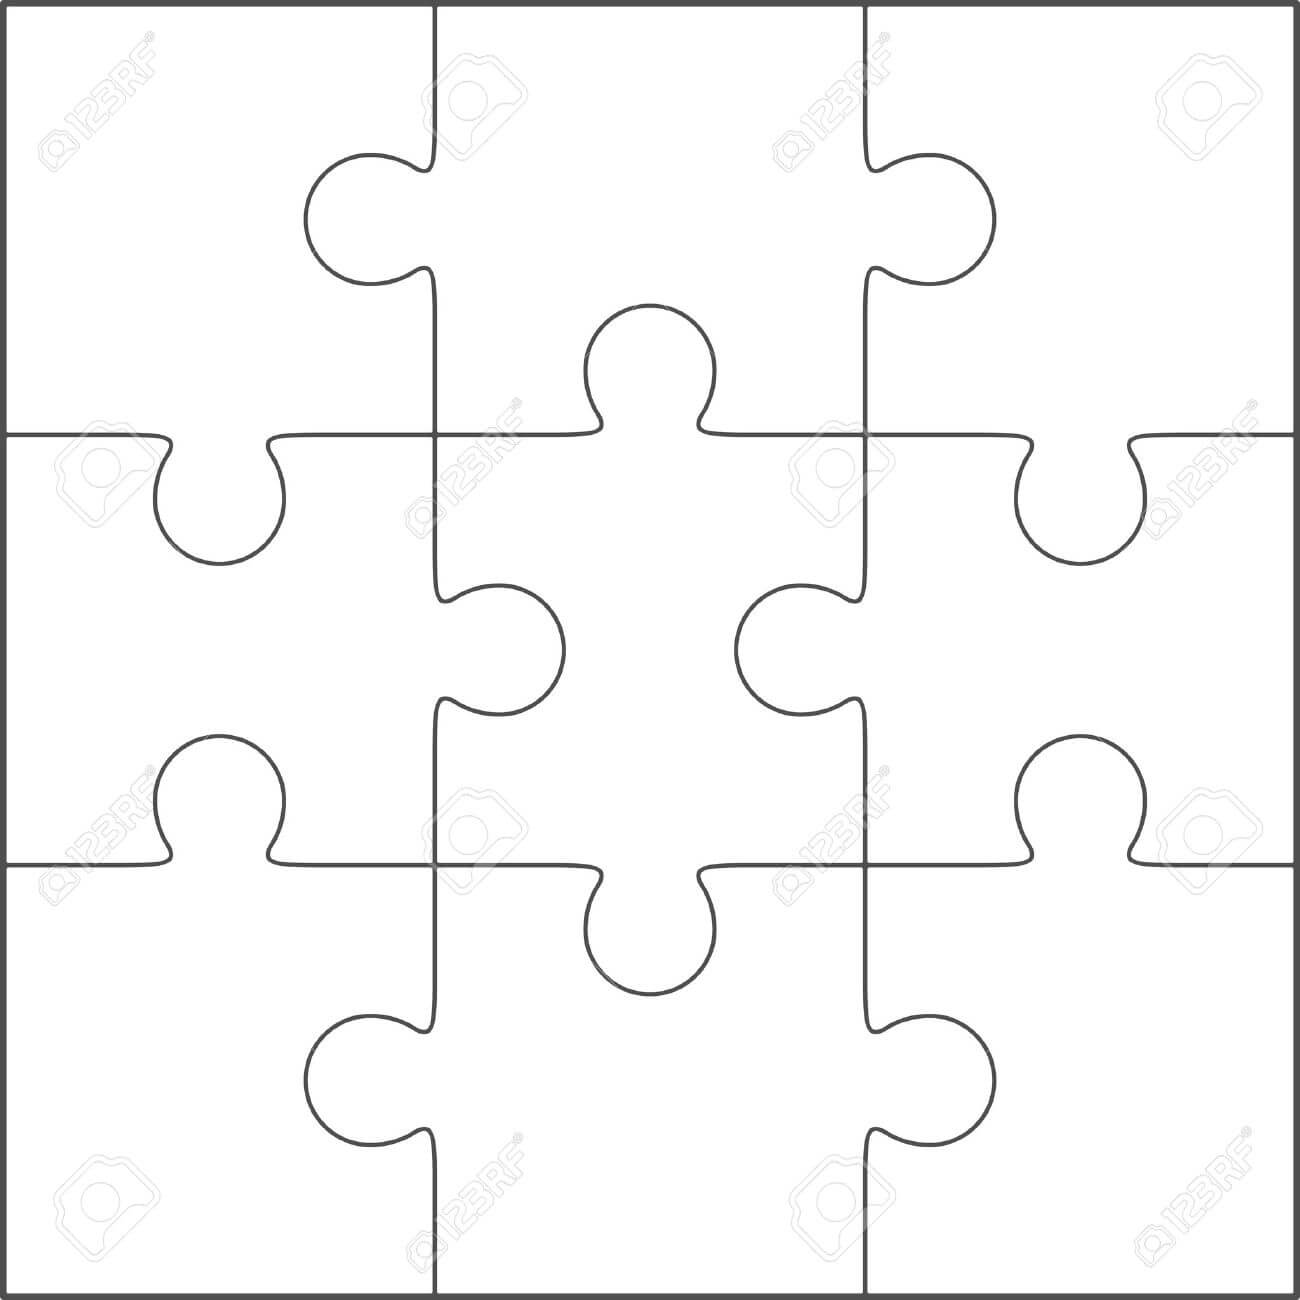 Jigsaw Puzzle Vector, Blank Simple Template 3X3 With Blank Jigsaw Piece Template